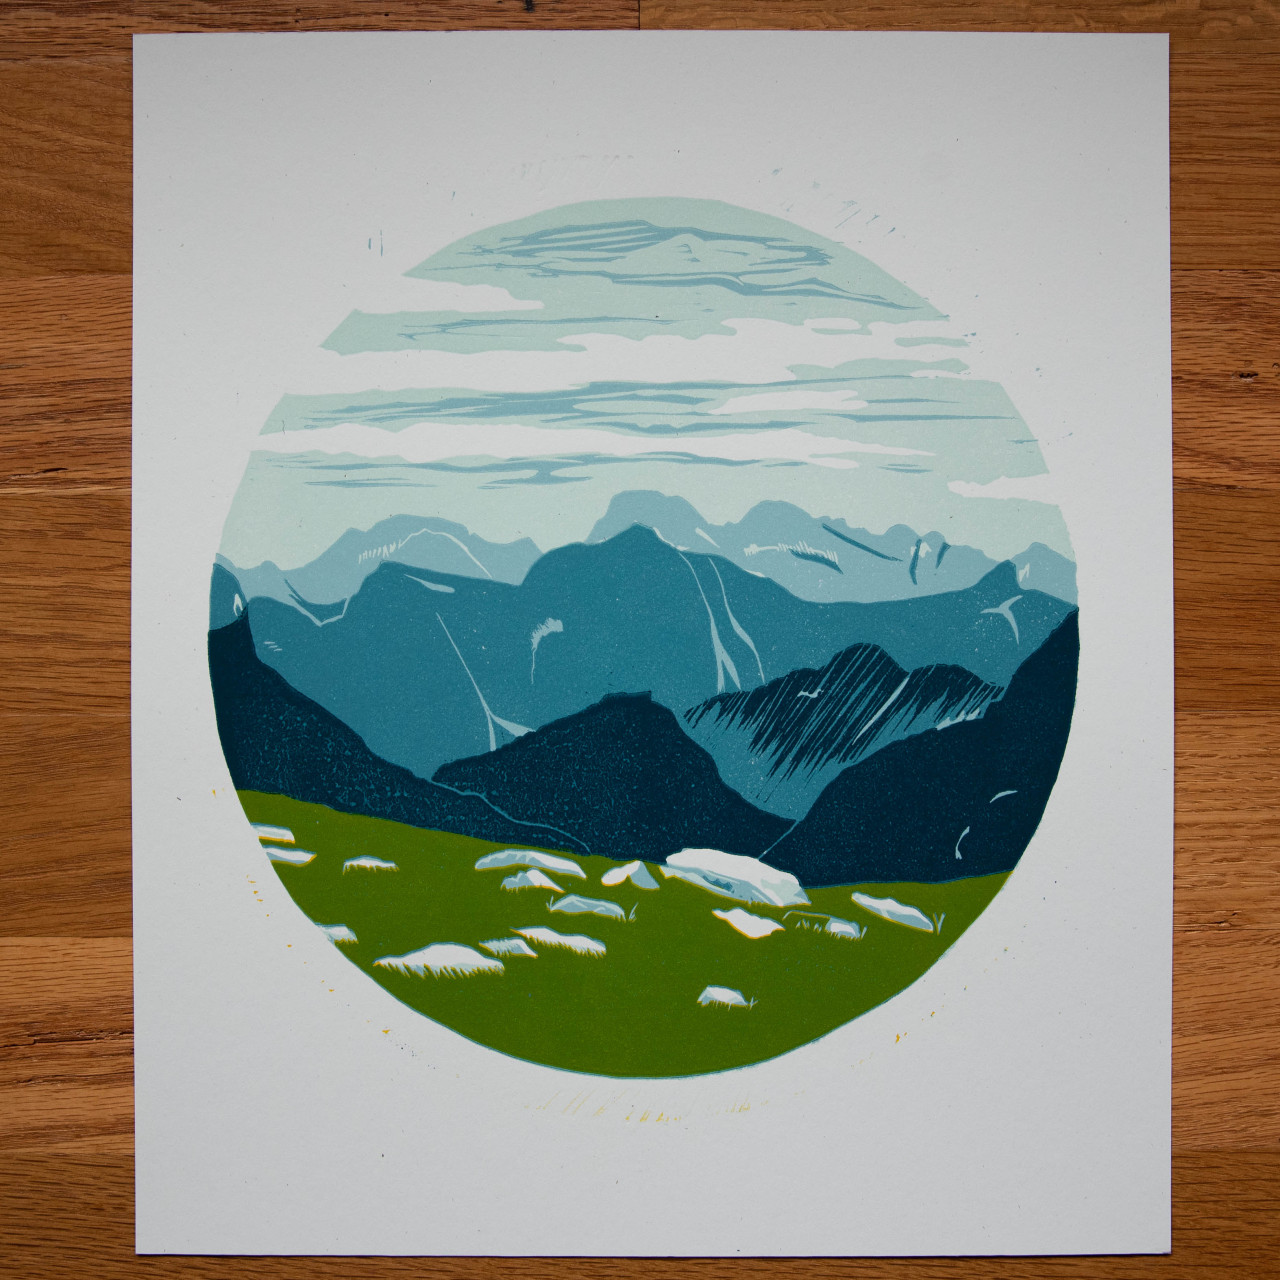 Wind River Range Reduction linoleum print
Limited edition five layered linoleum reduction cut.
Carved by hand. Printed by hand, one layer at a time, on a Vandercook 0 Proof Press.
A bit about the print process:
I started printing the sky and finished...